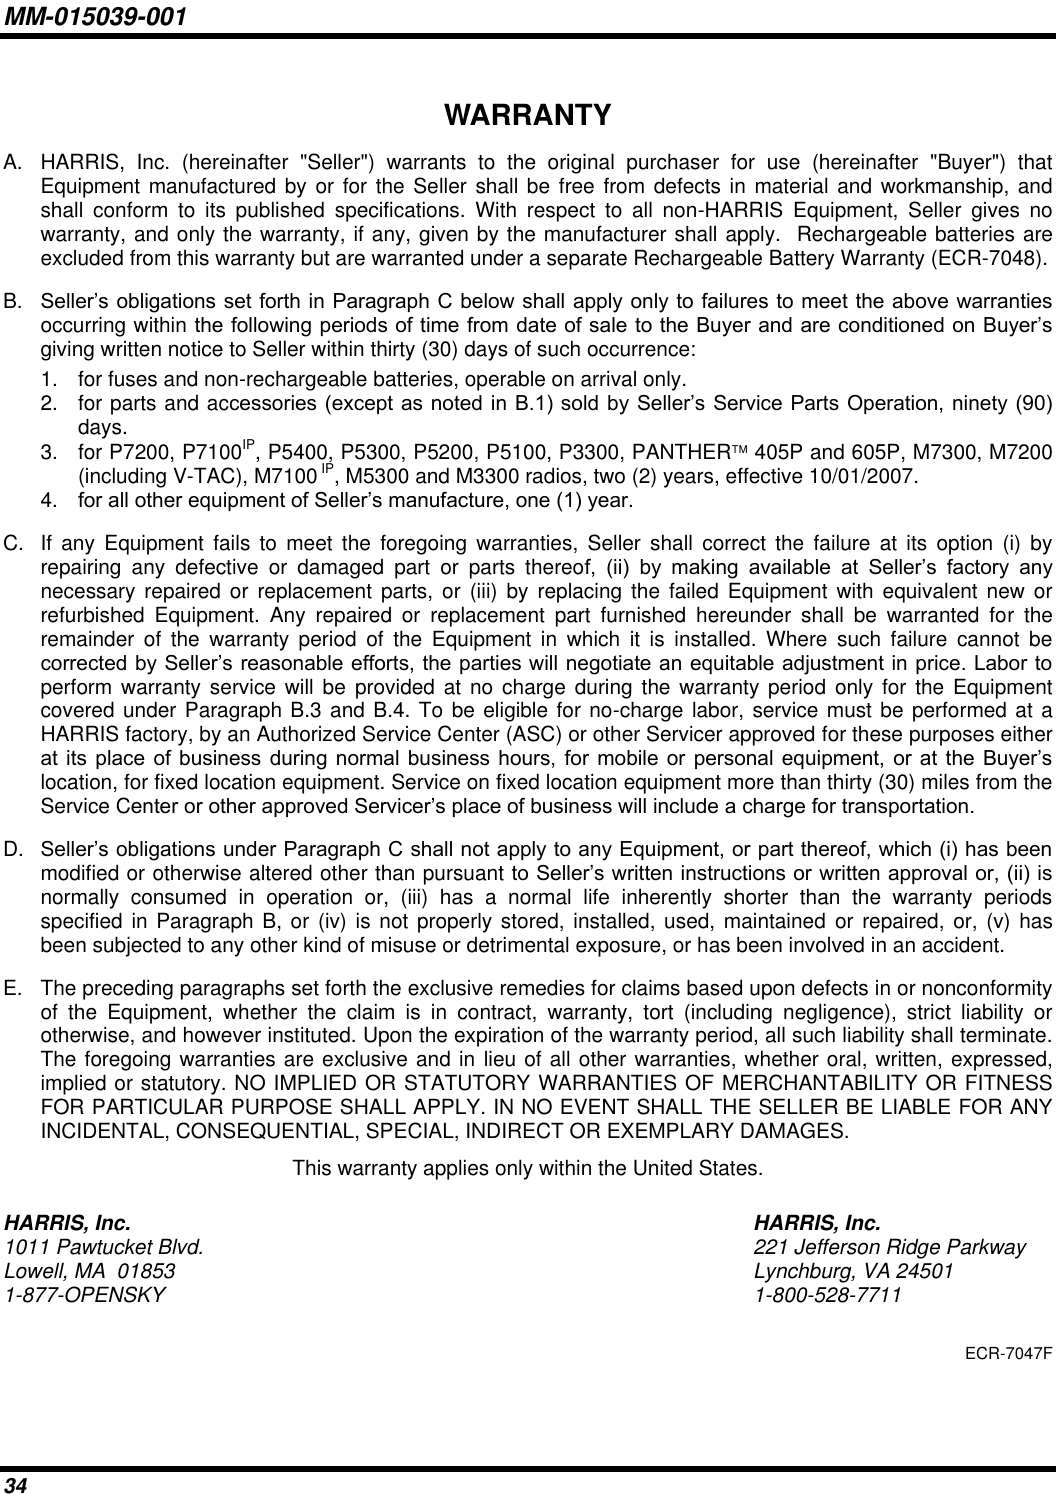 MM-015039-001 34 WARRANTY A.  HARRIS,  Inc.  (hereinafter  &quot;Seller&quot;)  warrants  to  the  original  purchaser  for  use  (hereinafter  &quot;Buyer&quot;)  that Equipment manufactured by or for the Seller shall  be  free  from defects in material and  workmanship, and shall  conform  to  its  published  specifications.  With  respect  to  all  non-HARRIS  Equipment,  Seller  gives  no warranty, and only the warranty, if any, given by the manufacturer shall apply.  Rechargeable batteries are excluded from this warranty but are warranted under a separate Rechargeable Battery Warranty (ECR-7048). B. Seller’s obligations set forth in Paragraph C below shall apply only to failures to meet the above warranties occurring within the following periods of time from date of sale to the Buyer and are conditioned on Buyer’s giving written notice to Seller within thirty (30) days of such occurrence: 1.  for fuses and non-rechargeable batteries, operable on arrival only. 2.  for parts and accessories (except as noted in  B.1) sold  by Seller’s  Service Parts Operation, ninety  (90) days. 3.  for P7200, P7100IP, P5400, P5300, P5200, P5100, P3300, PANTHER 405P and 605P, M7300, M7200 (including V-TAC), M7100 IP, M5300 and M3300 radios, two (2) years, effective 10/01/2007. 4. for all other equipment of Seller’s manufacture, one (1) year. C.  If  any  Equipment  fails  to  meet the  foregoing  warranties,  Seller shall  correct  the  failure  at its  option  (i)  by repairing  any  defective  or  damaged  part  or  parts  thereof,  (ii)  by  making  available  at  Seller’s  factory  any necessary repaired  or  replacement parts,  or (iii) by  replacing the  failed  Equipment with  equivalent  new or refurbished  Equipment.  Any  repaired  or  replacement  part  furnished  hereunder  shall  be  warranted  for  the remainder  of  the  warranty  period  of  the  Equipment  in  which  it  is  installed.  Where  such  failure  cannot  be corrected by Seller’s reasonable efforts, the parties will negotiate an equitable adjustment in price. Labor to perform warranty service will  be  provided at no charge  during the warranty  period  only  for  the Equipment covered under Paragraph B.3 and B.4. To be eligible for no-charge labor, service must be performed at a HARRIS factory, by an Authorized Service Center (ASC) or other Servicer approved for these purposes either at  its  place  of business  during  normal  business  hours,  for  mobile  or personal equipment, or at  the  Buyer’s location, for fixed location equipment. Service on fixed location equipment more than thirty (30) miles from the Service Center or other approved Servicer’s place of business will include a charge for transportation. D. Seller’s obligations under Paragraph C shall not apply to any Equipment, or part thereof, which (i) has been modified or otherwise altered other than pursuant to Seller’s written instructions or written approval or, (ii) is normally  consumed  in  operation  or,  (iii)  has  a  normal  life  inherently  shorter  than  the  warranty  periods specified in Paragraph B, or  (iv) is not properly stored, installed, used, maintained  or repaired, or, (v) has been subjected to any other kind of misuse or detrimental exposure, or has been involved in an accident. E.  The preceding paragraphs set forth the exclusive remedies for claims based upon defects in or nonconformity of  the  Equipment,  whether  the  claim  is  in  contract,  warranty,  tort  (including  negligence),  strict  liability  or otherwise, and however instituted. Upon the expiration of the warranty period, all such liability shall terminate. The foregoing warranties are exclusive and in lieu of all other warranties, whether oral, written, expressed, implied or statutory. NO IMPLIED OR STATUTORY WARRANTIES OF MERCHANTABILITY OR FITNESS FOR PARTICULAR PURPOSE SHALL APPLY. IN NO EVENT SHALL THE SELLER BE LIABLE FOR ANY INCIDENTAL, CONSEQUENTIAL, SPECIAL, INDIRECT OR EXEMPLARY DAMAGES. This warranty applies only within the United States. HARRIS, Inc.  HARRIS, Inc. 1011 Pawtucket Blvd.  221 Jefferson Ridge Parkway Lowell, MA  01853  Lynchburg, VA 24501 1-877-OPENSKY  1-800-528-7711 ECR-7047F 